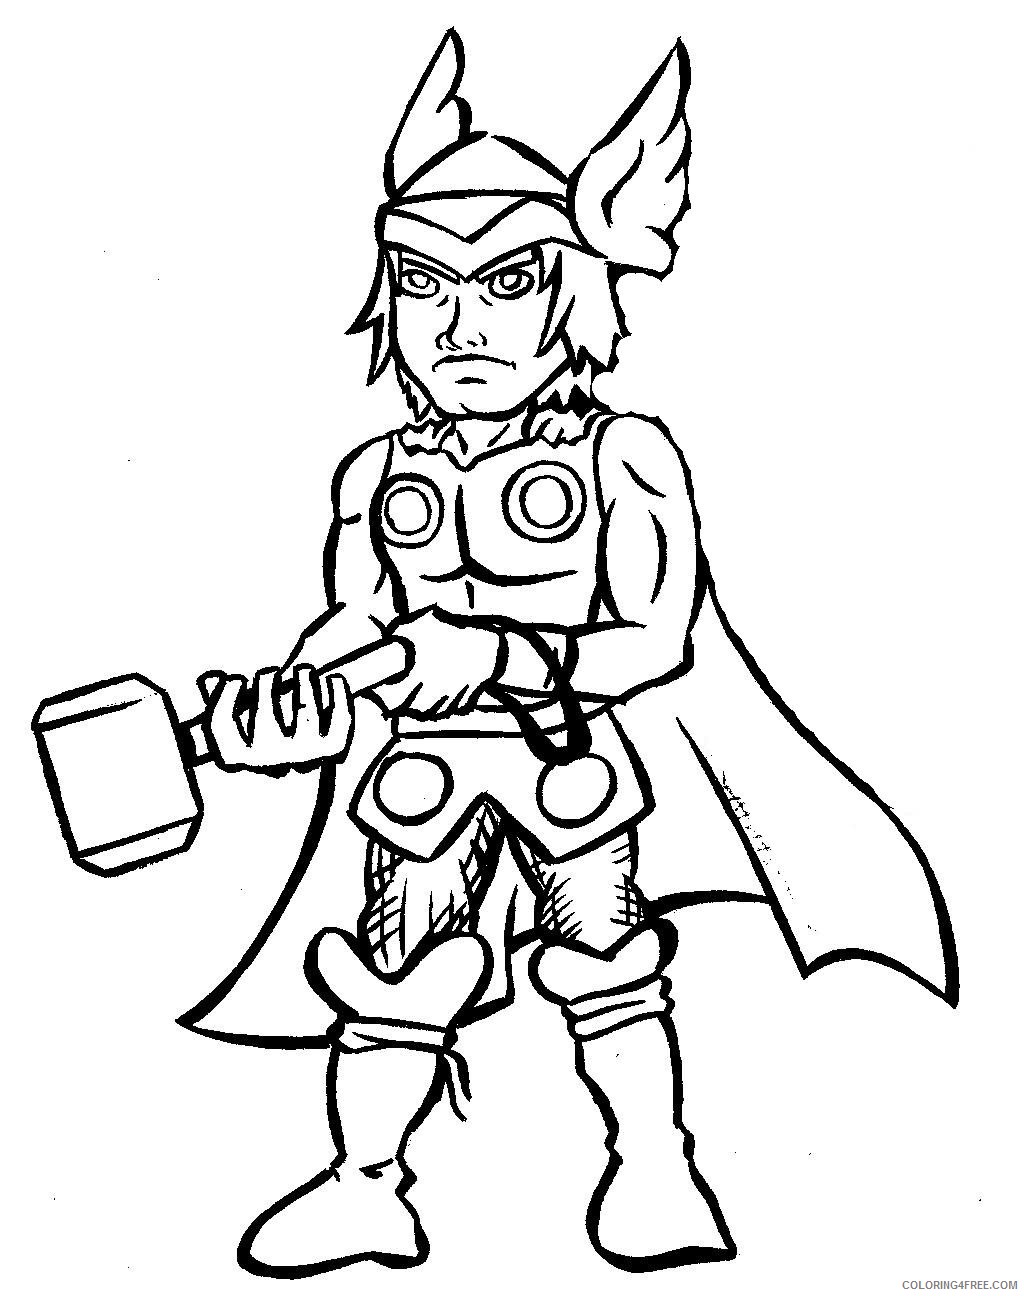 free thor coloring pages for kids Coloring4free Coloring4Free com